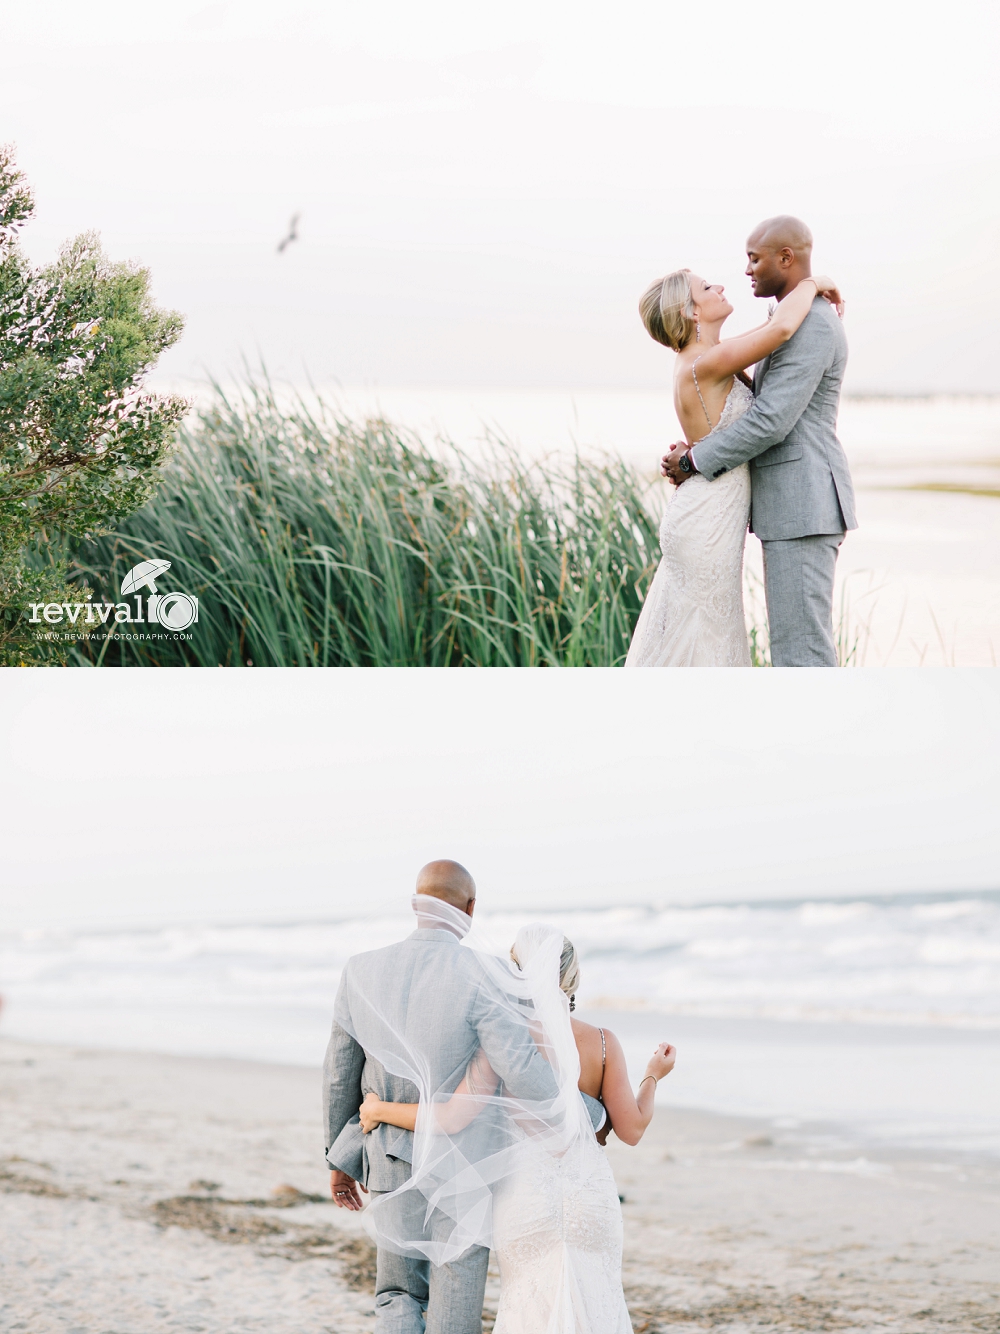 Vanessa+and+Patrick's+Destination+Wedding+Adventure+in+the+OBX+Photography+by+Revival+Photography+www.revivalphotography (1).jpeg